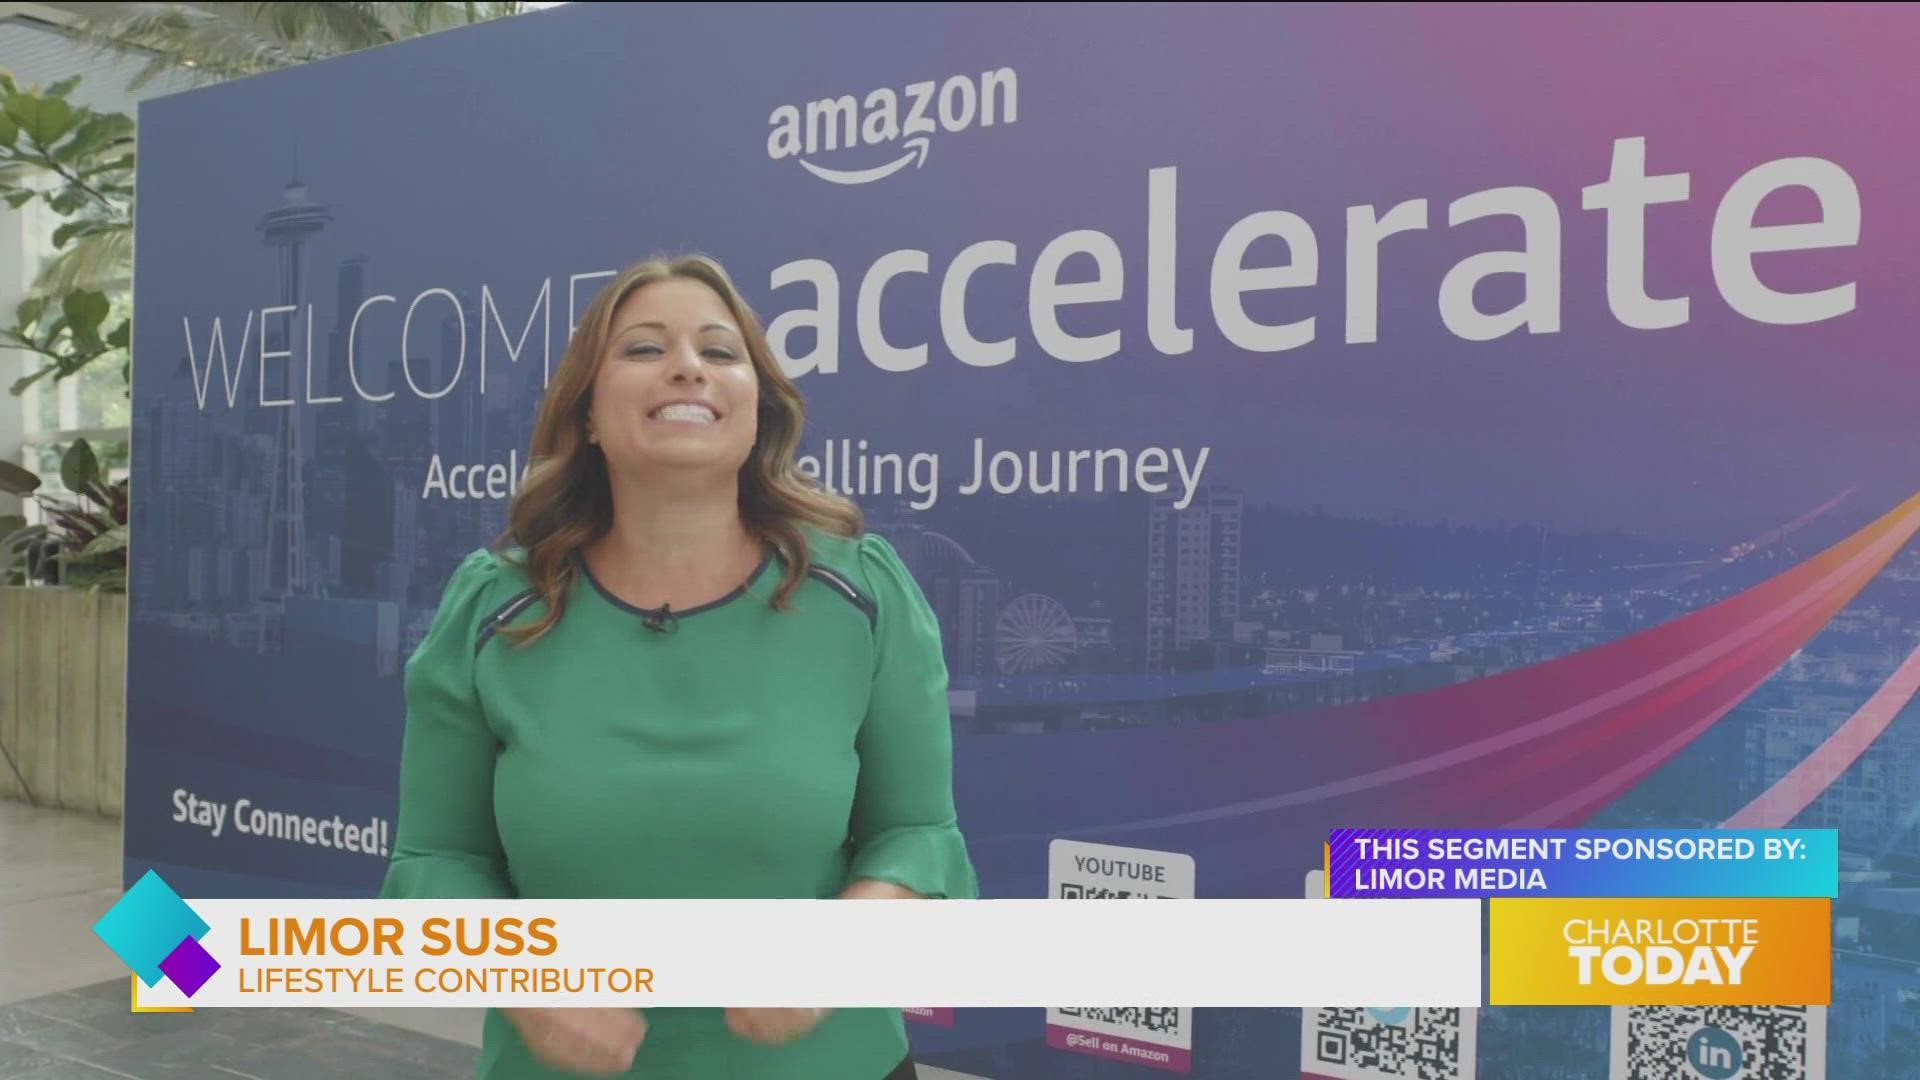 Be inspired by attending the Amazon Accelerate Conference